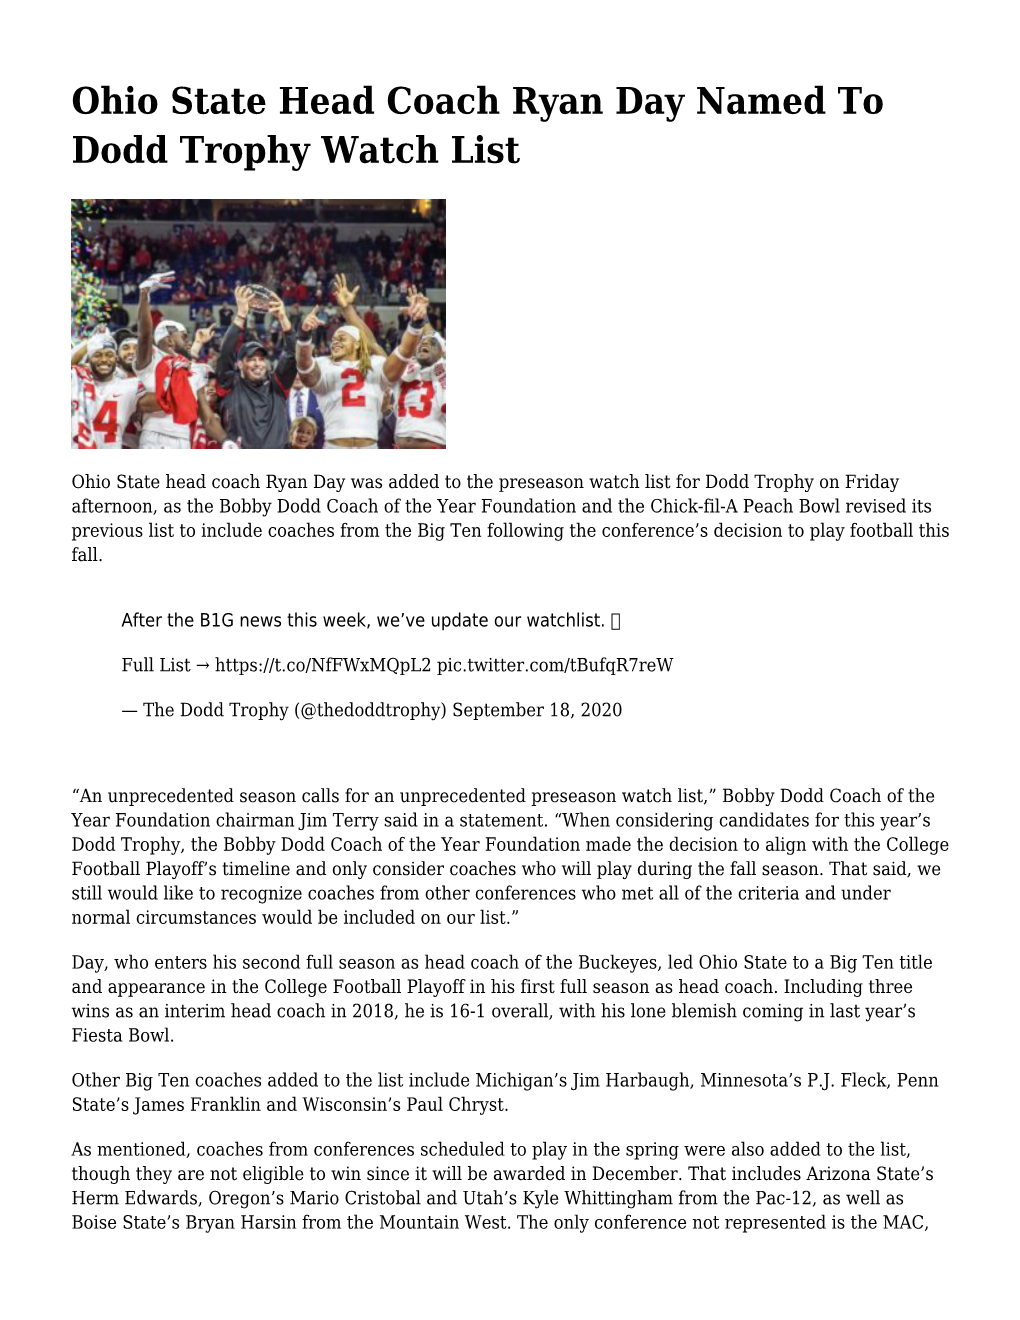 Ohio State Head Coach Ryan Day Named to Dodd Trophy Watch List